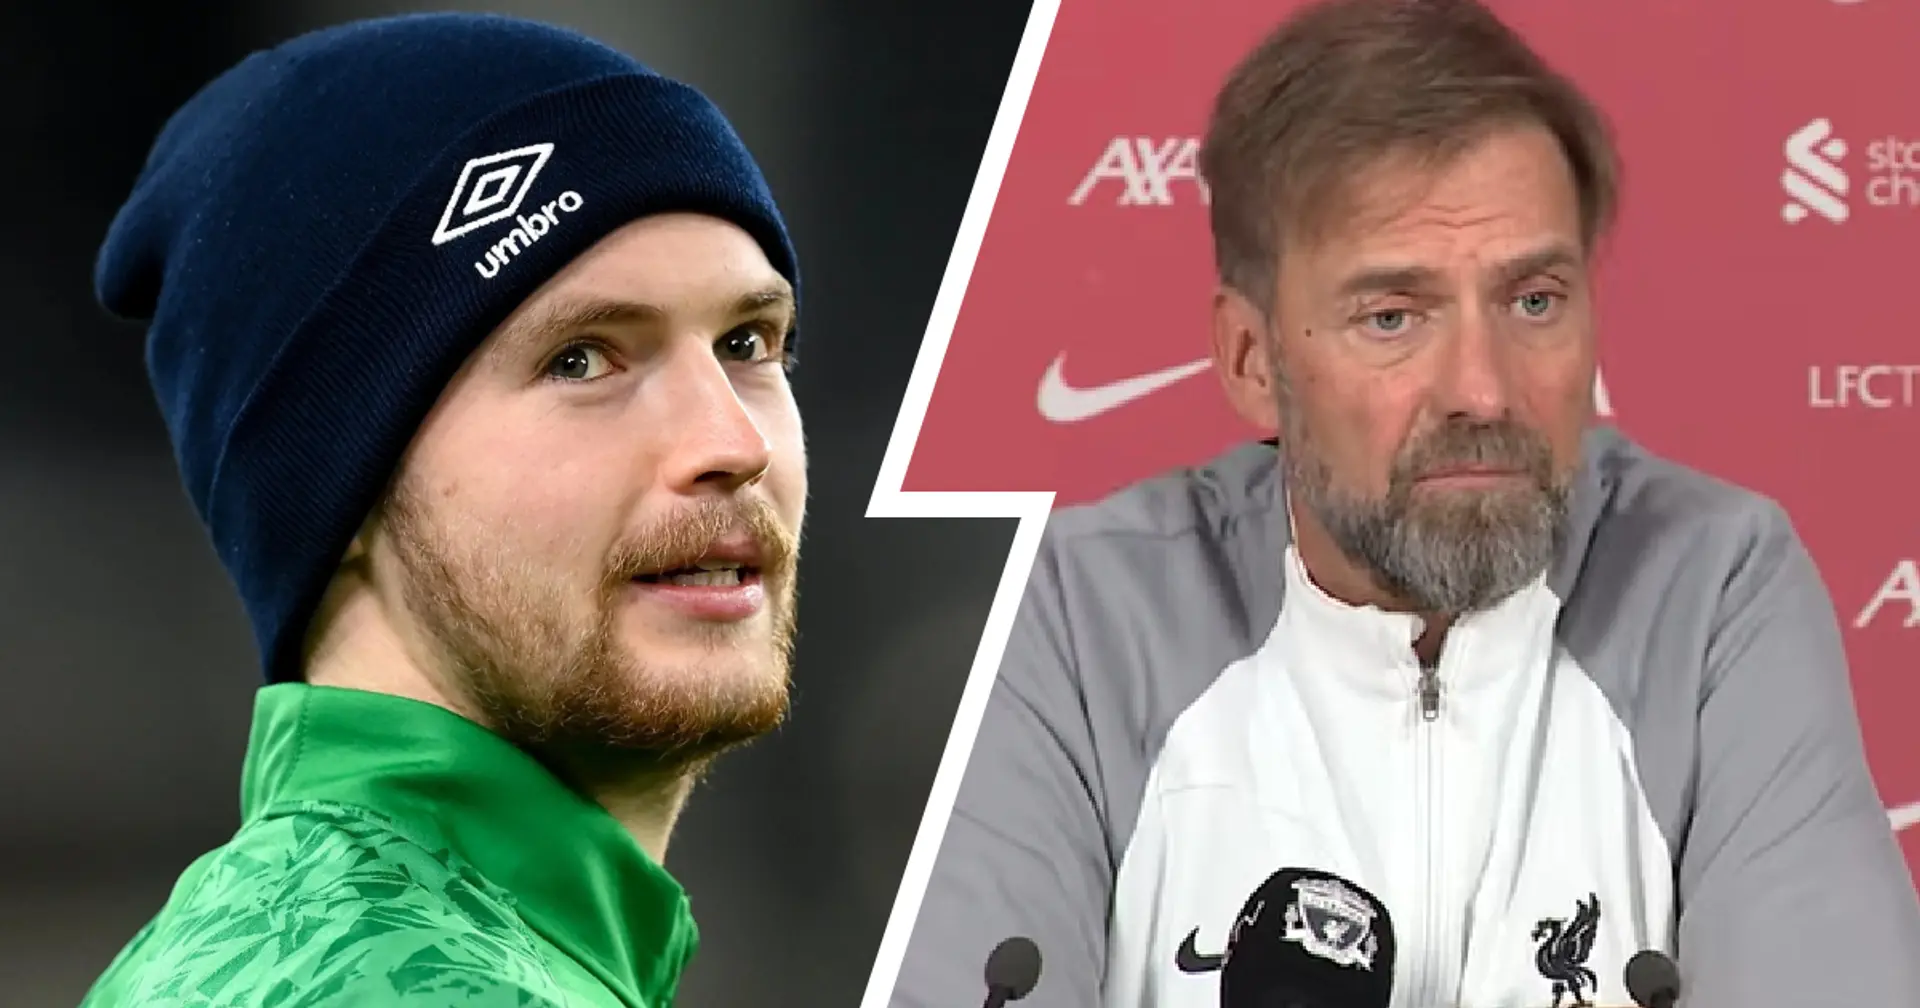 'Blonde version of Ali': Klopp explains why Kelleher can't be Liverpool first choice despite penalty heroics